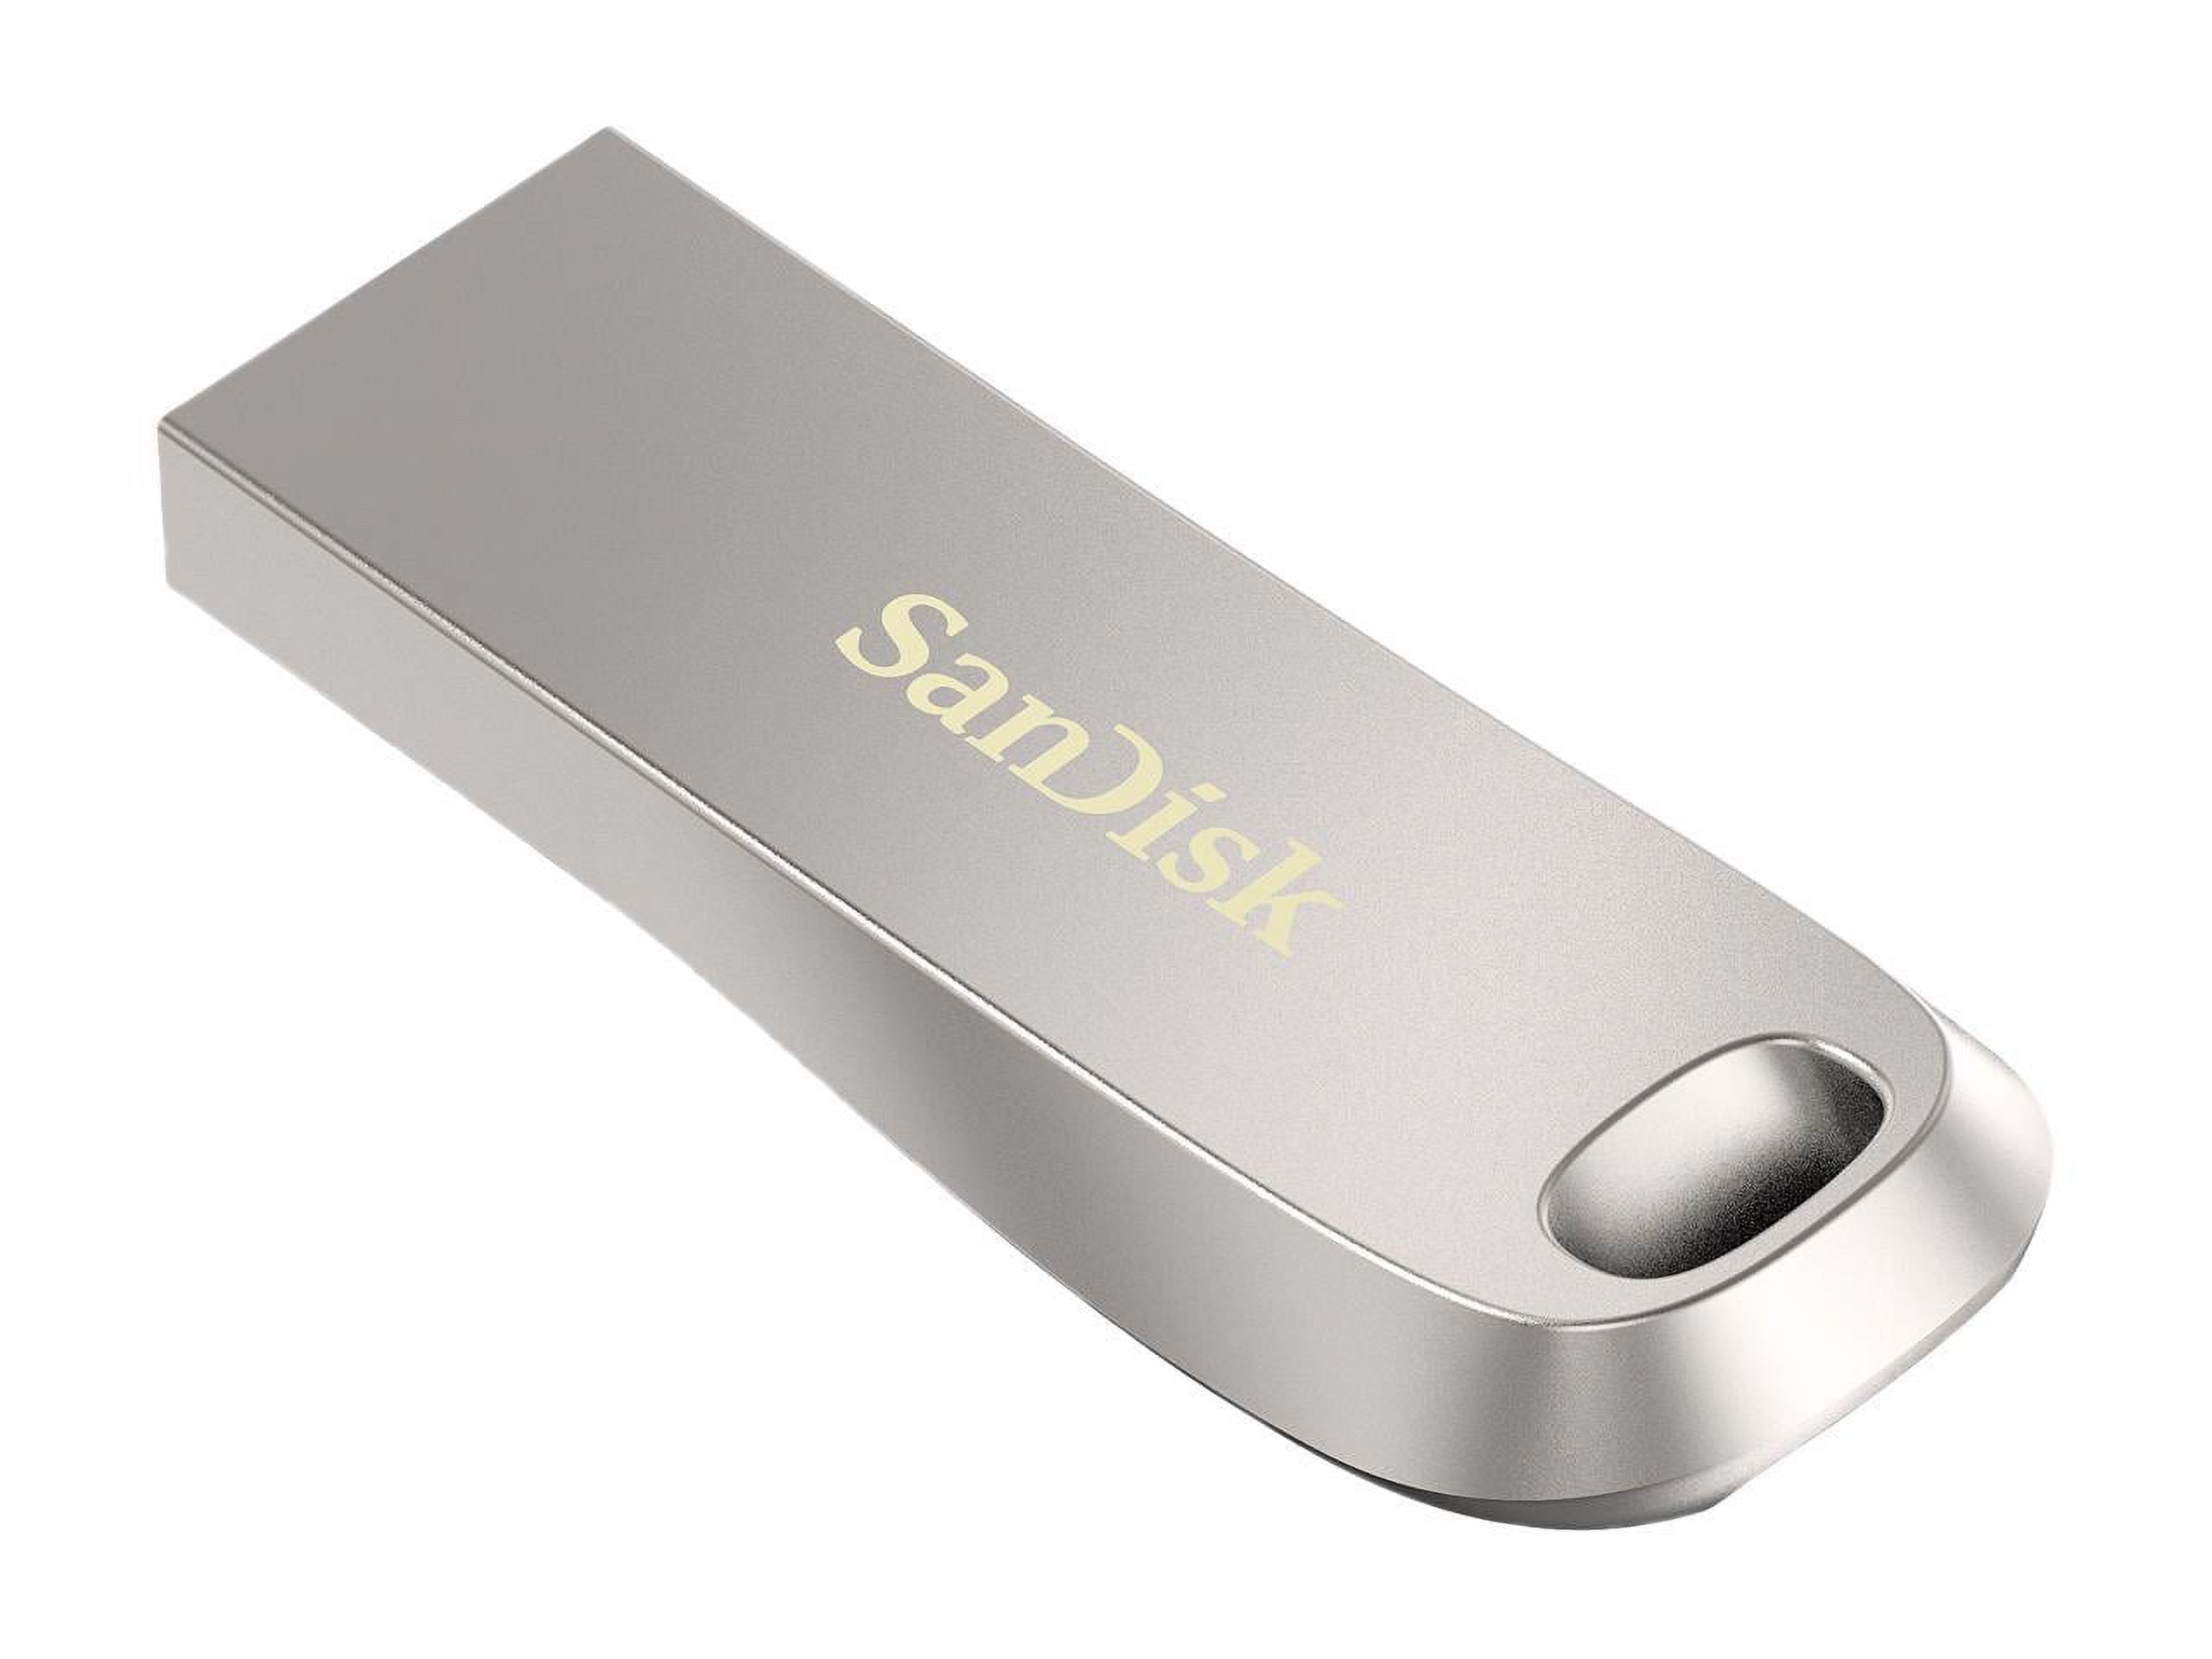 SanDisk 128GB Ultra Luxe USB 3.1 Flash Drive, Speed Up to 150MB/s (SDCZ74-128G-G46) - image 2 of 5